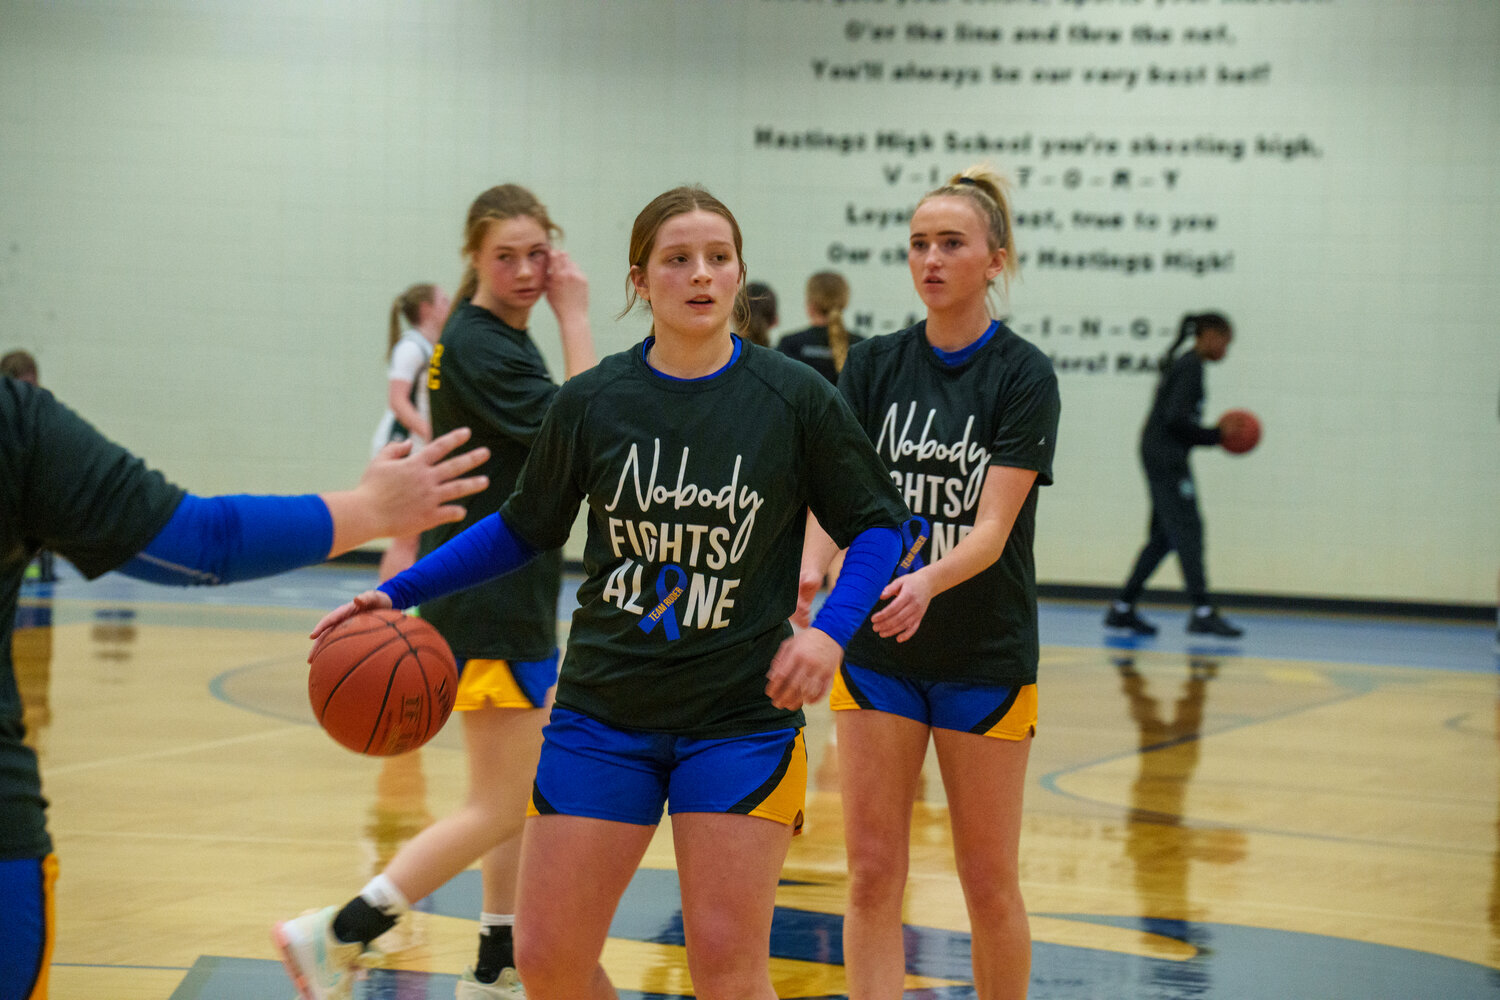 The season opener for Hastings included a special moment for the Ruder Family. Junior Kate Ruder and many of the girls on the varsity roster have been coached by Kate’s father, Bill. Bill was diagnosed with cancer back in October. The team decided to wear special warm-up shirts for the season that says ‘Nobody Fights Alone’.